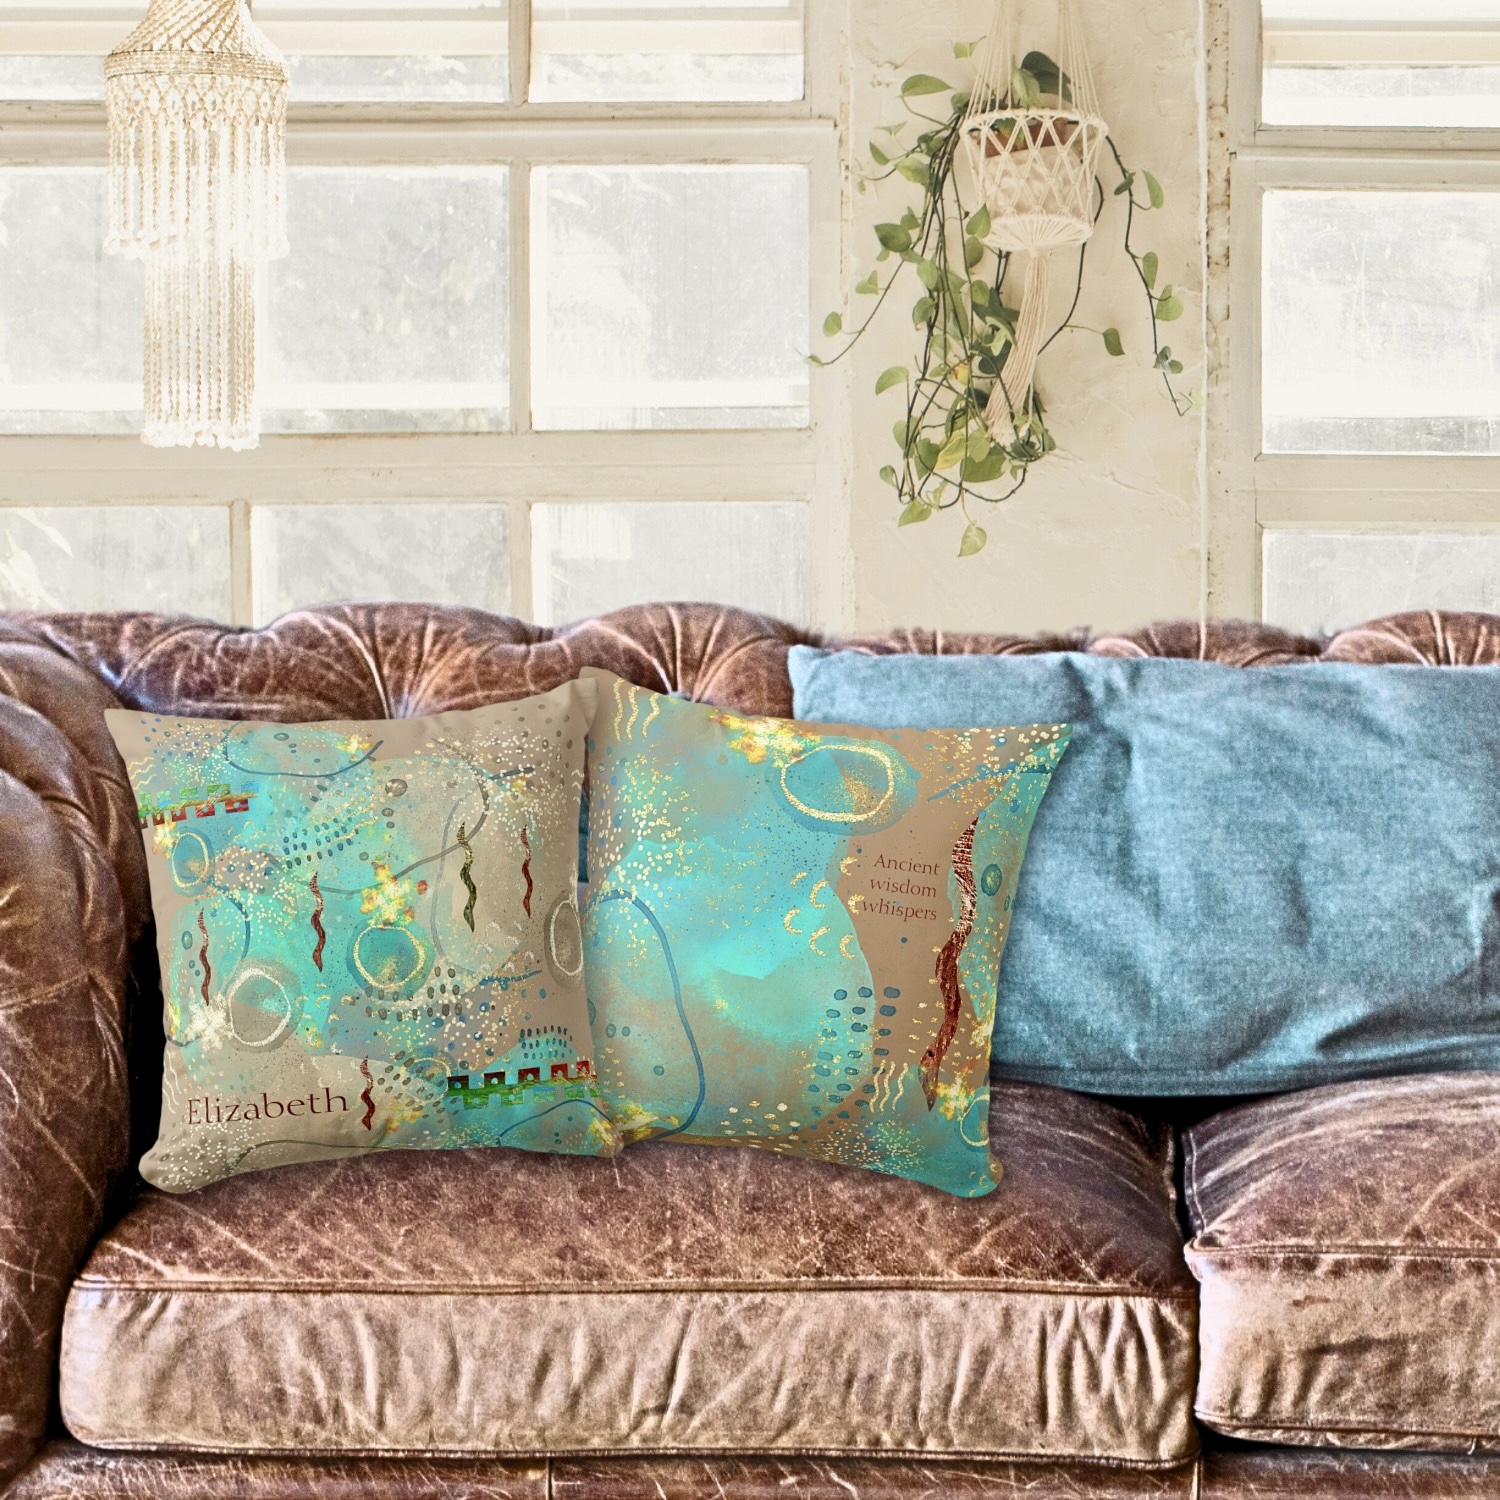 Turquoise Golden Throw Pillow: Experience the harmonious blend of ancient wisdom and modern comfort.